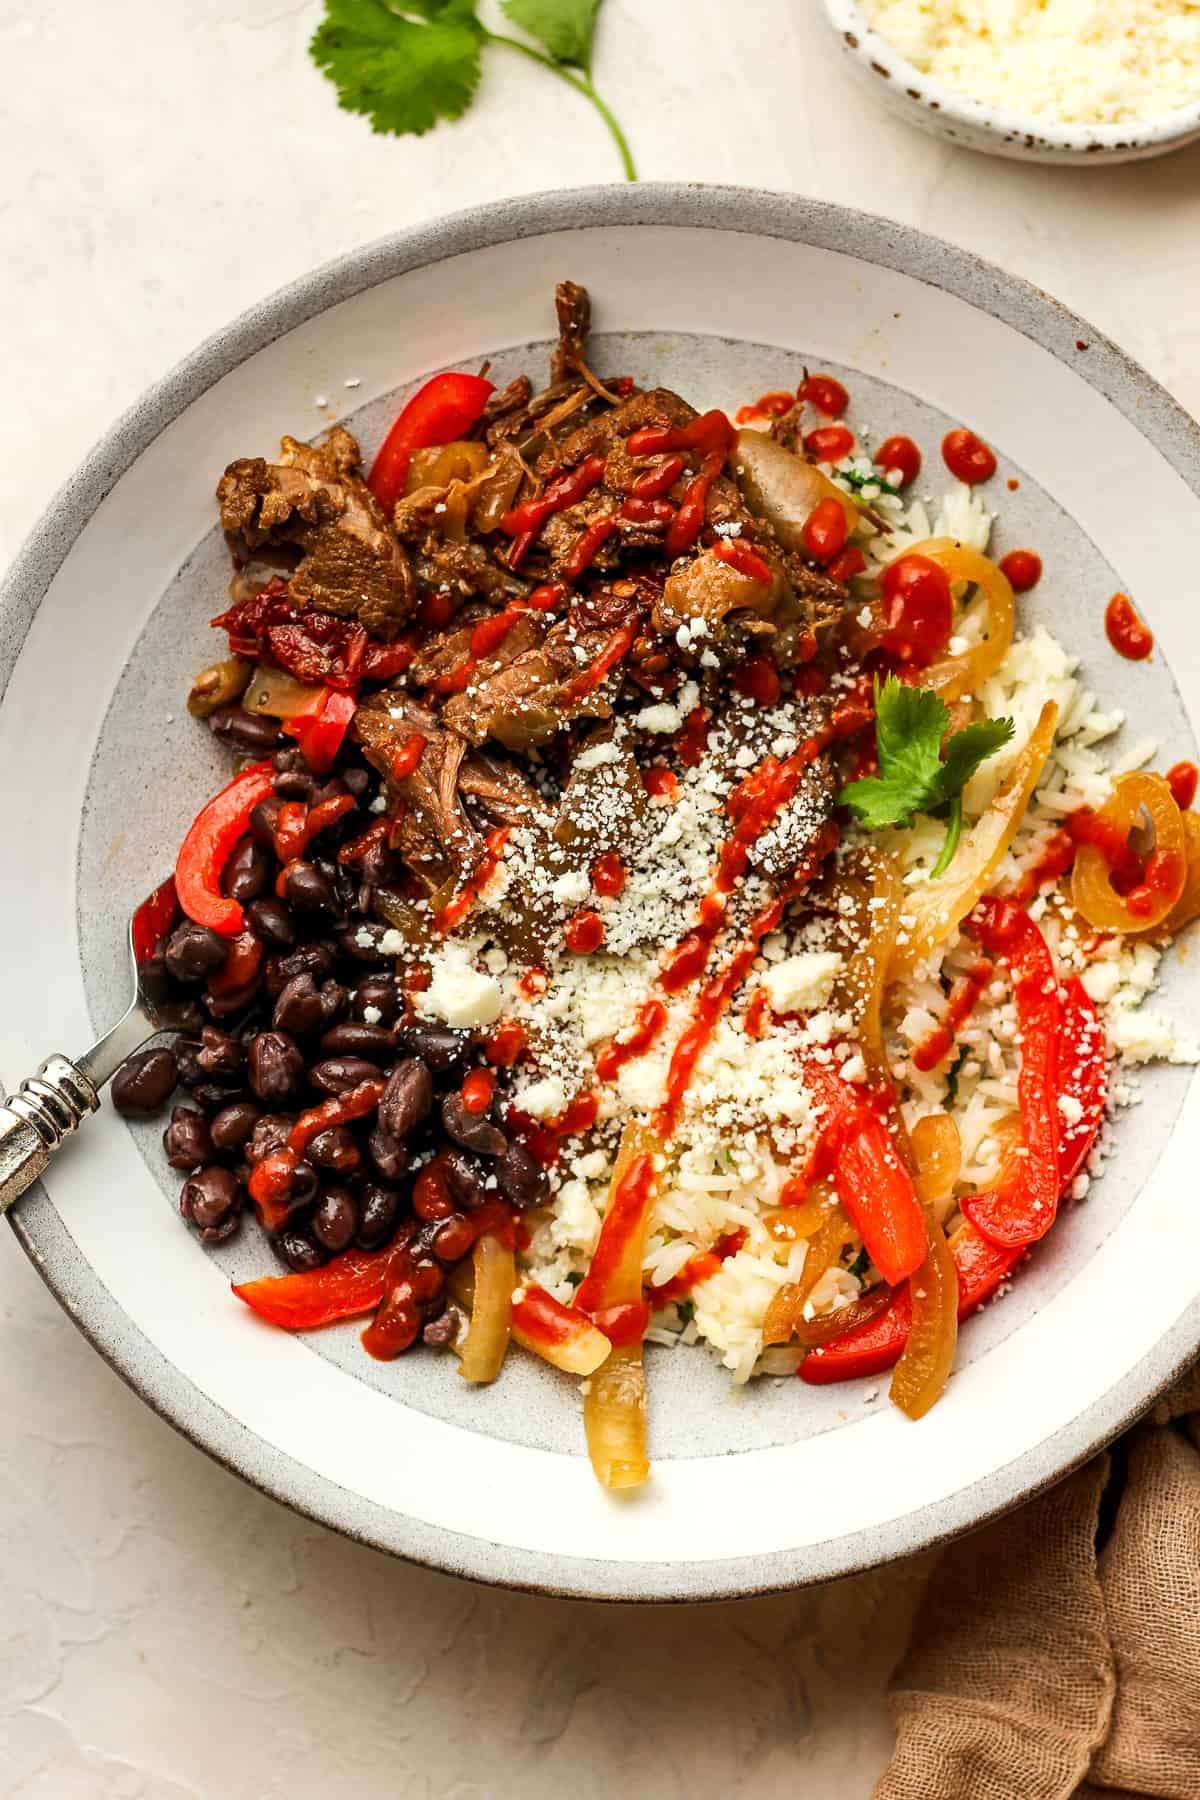 A shredded beef chipotle bowl with beans and rice.